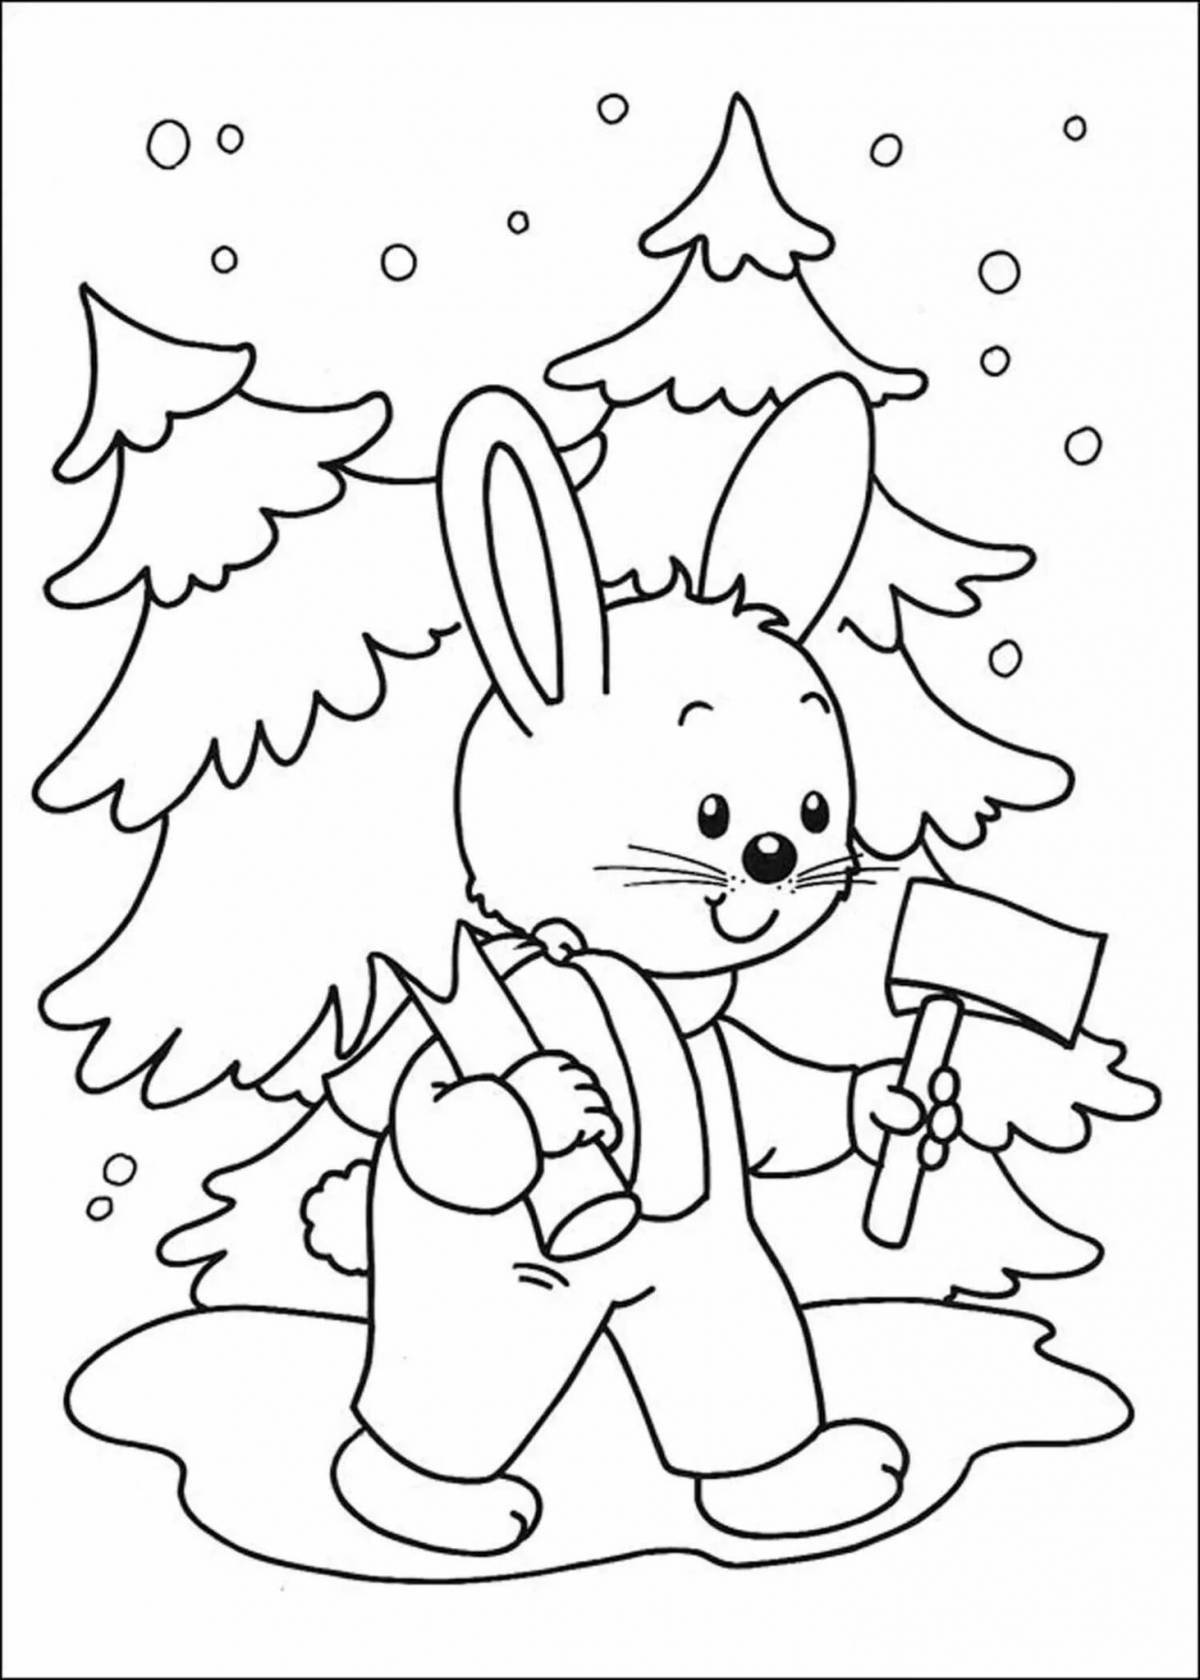 Fabulous Christmas coloring book for 5 year olds